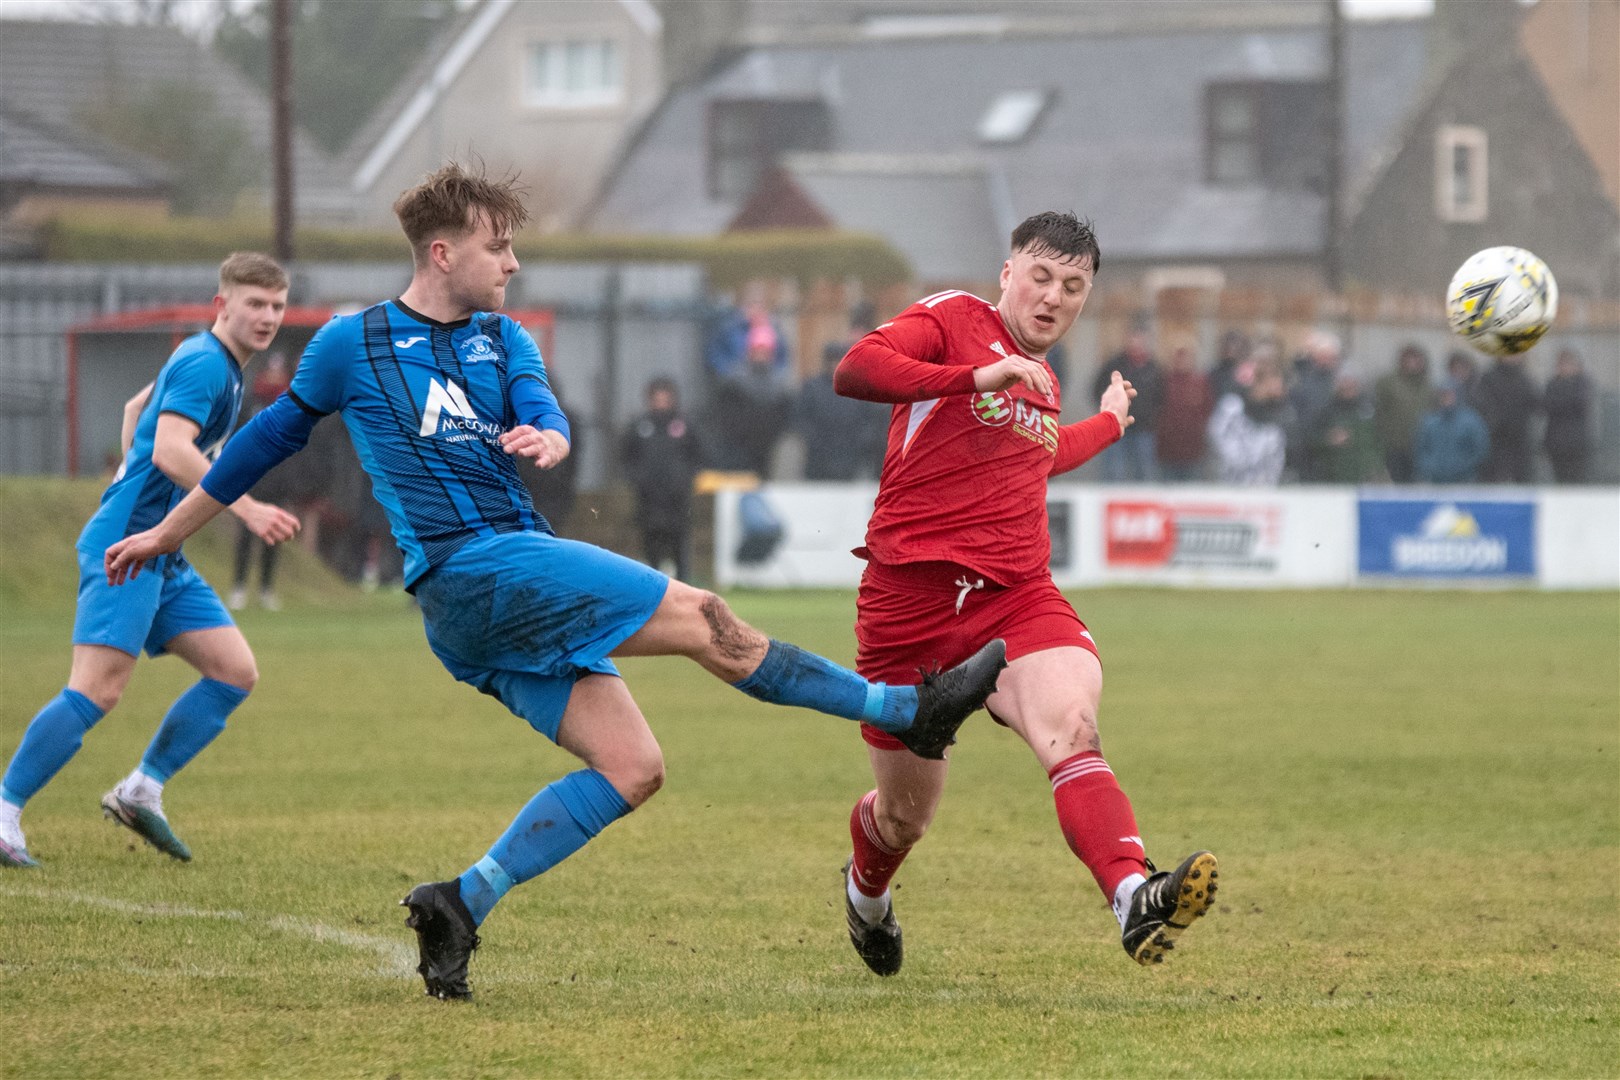 Strathspey's Michael McKenzie clears the ball away from Lossiemouth's Lewis McAndrew. ..Lossiemouth FC (2) vs Strathspey Thistle (1) - Highland Football League 23/24 - Grant Park, Lossie 10/02/2024...Picture: Daniel Forsyth..